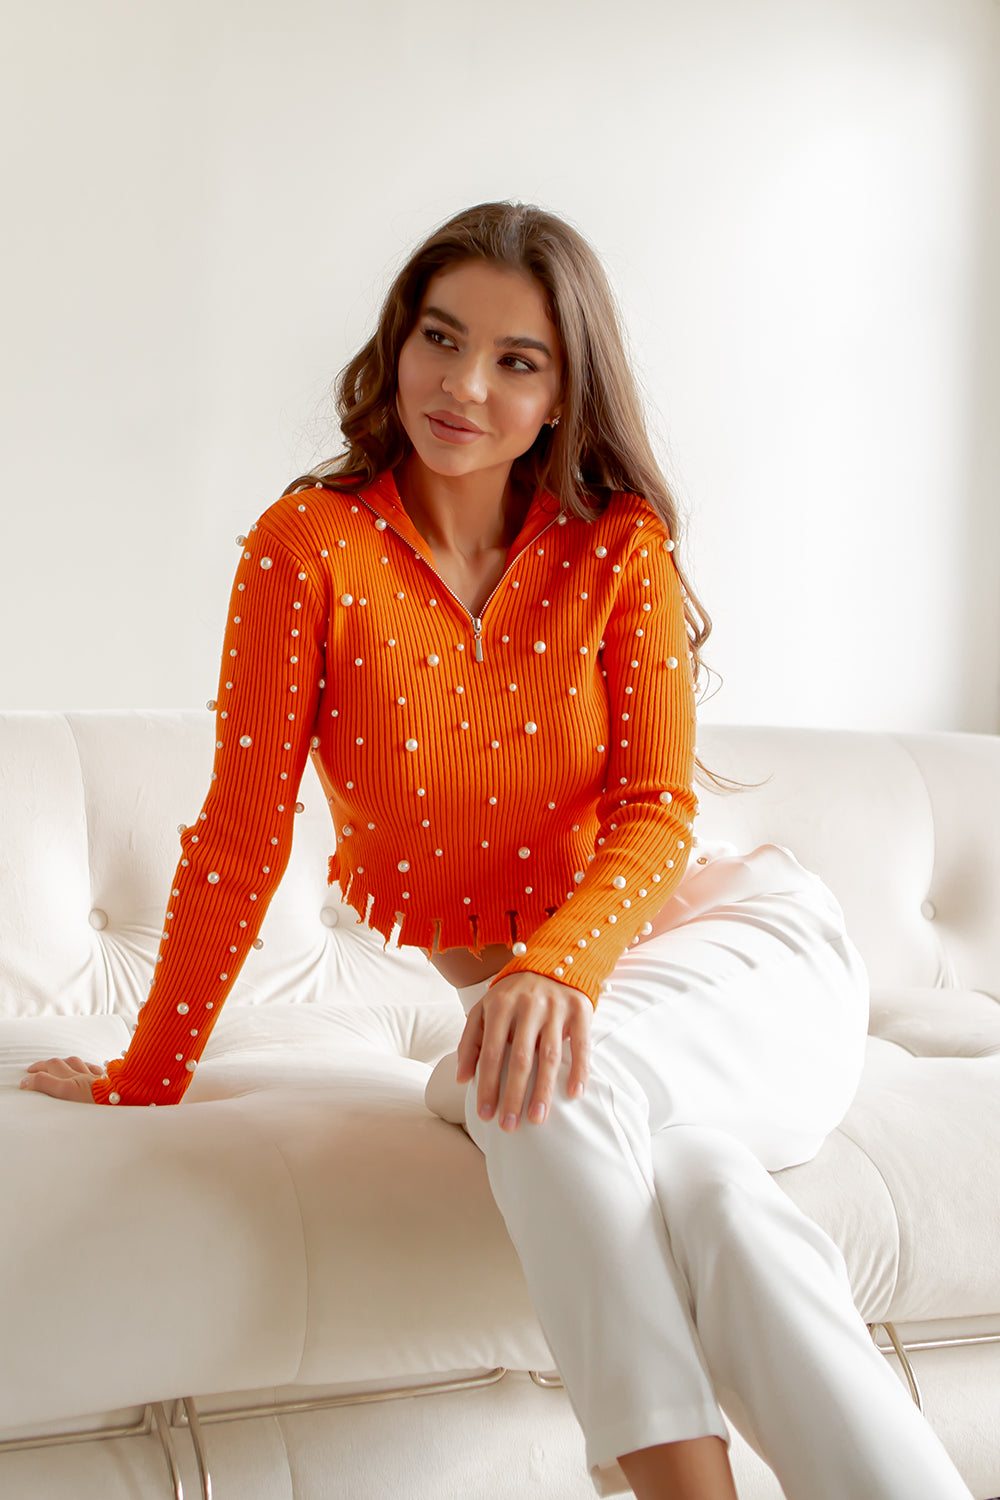 Ravello Knit sweater with pearls around